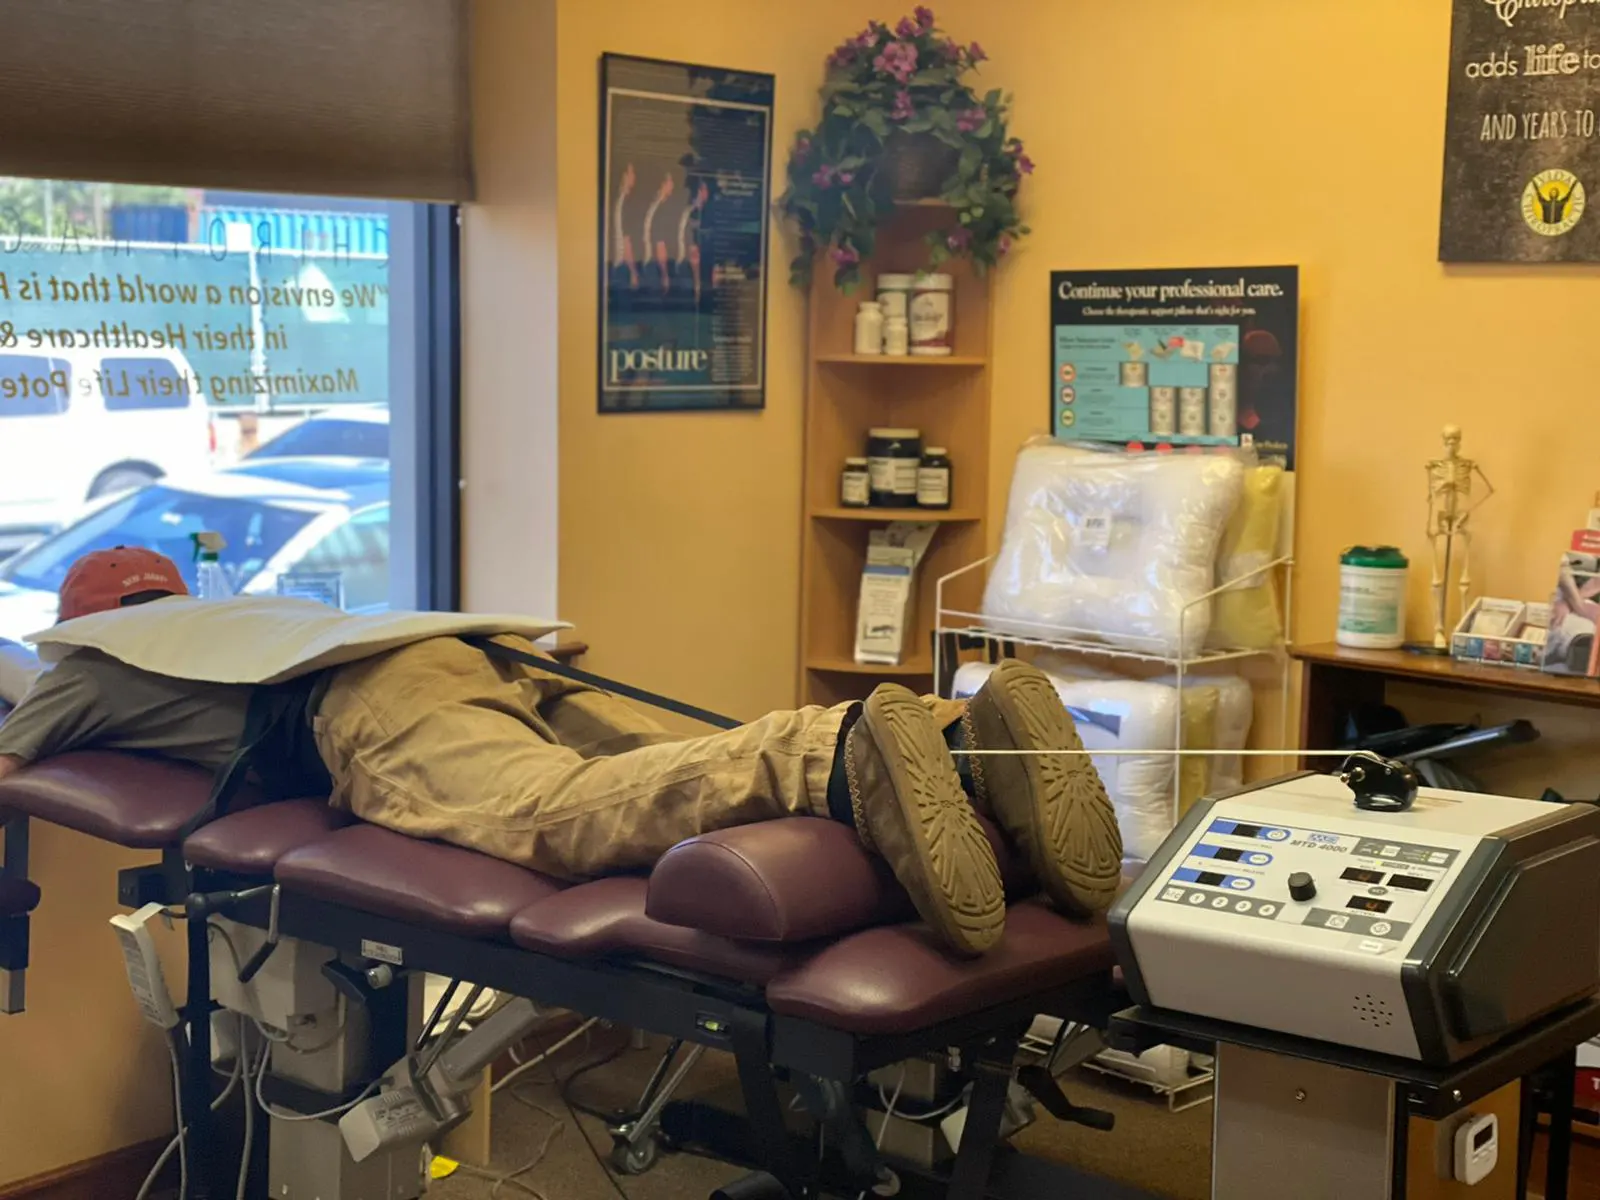 Electrical Stimulation Therapy – Health 1st Chiropractic